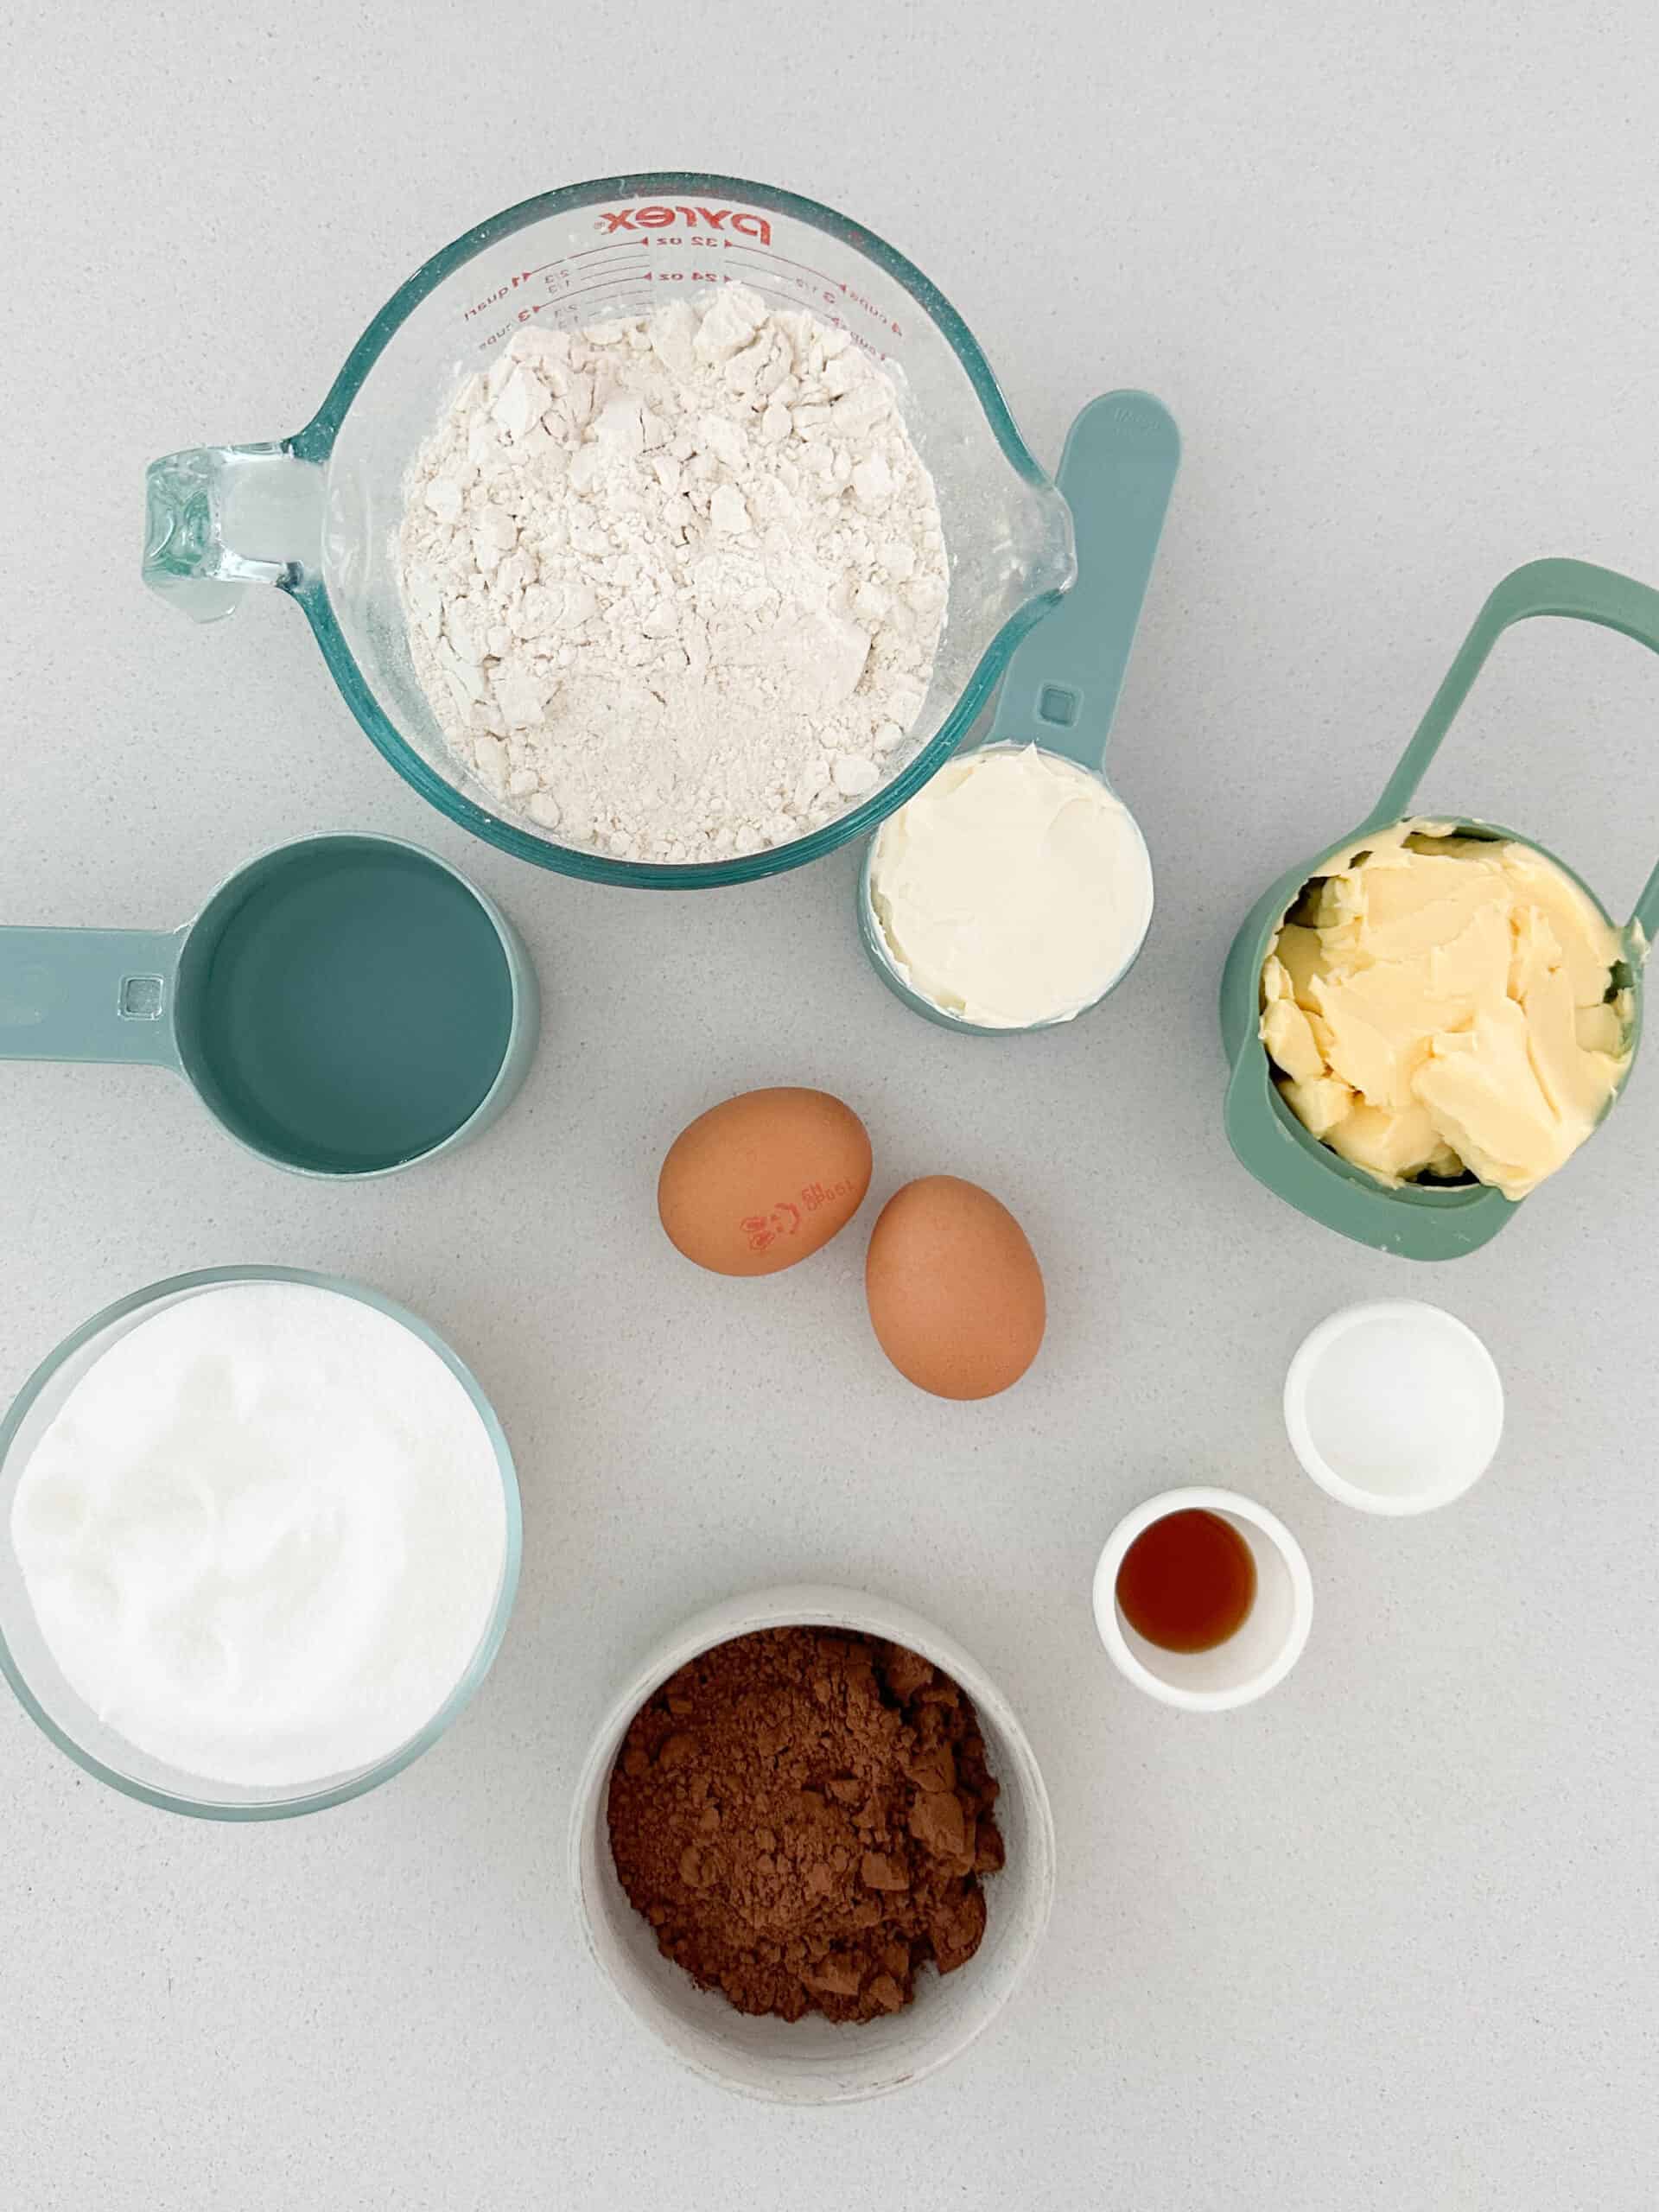 Easy Chocolate Tray Cake Ingredients